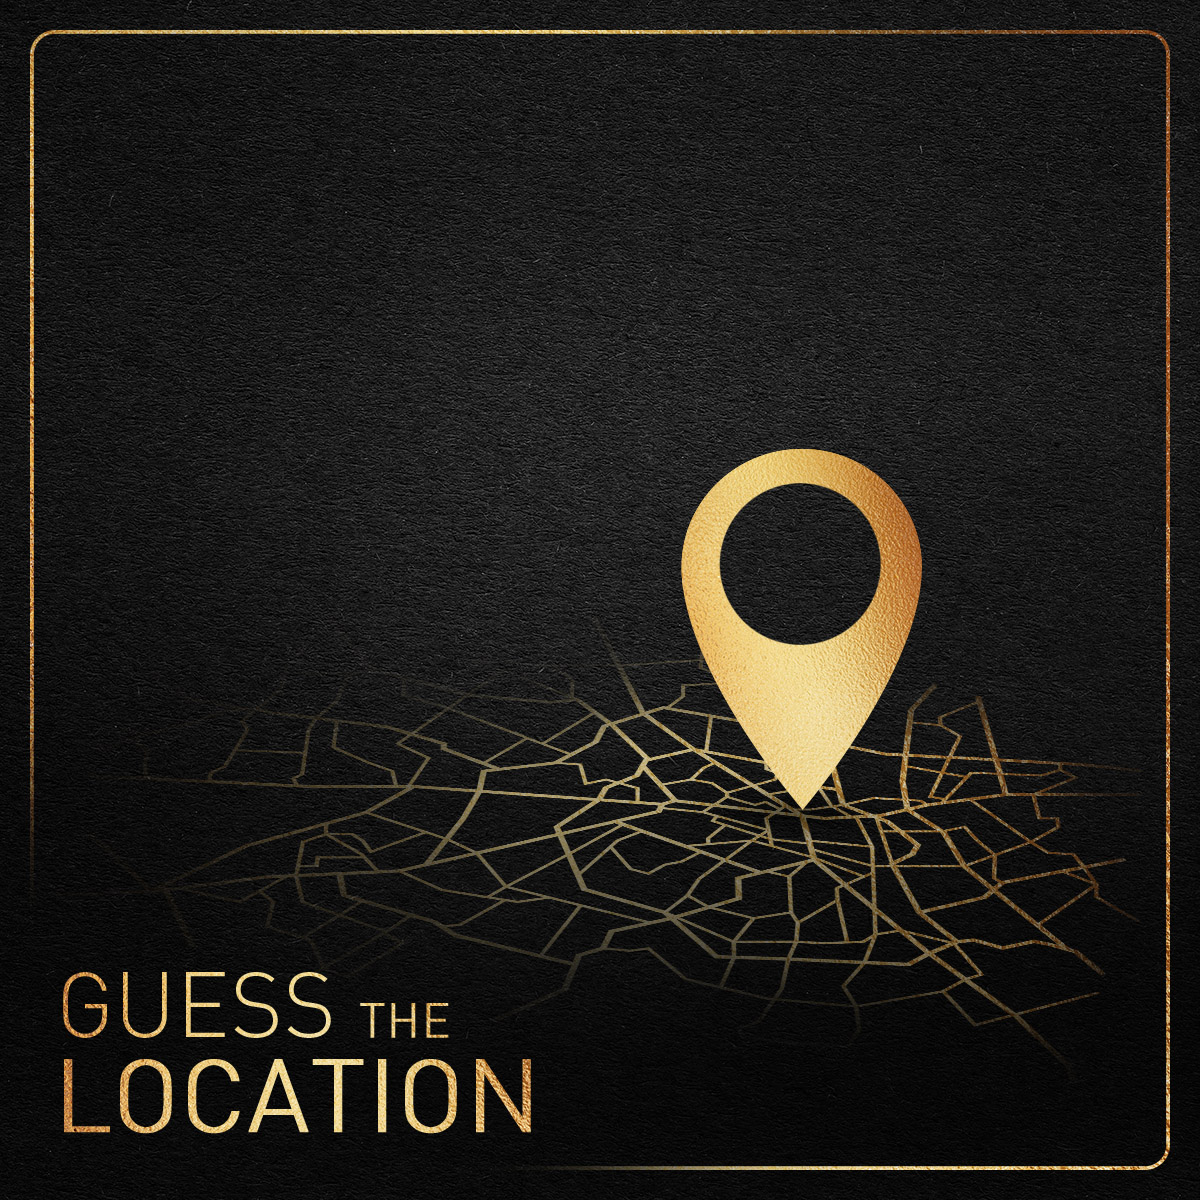 توییتر AIS در توییتر: "Let's play the guessing game! Guess our location and tell us in the comments where to find us. Keep those comments coming in. #UnveilingNewExperience #AIS #